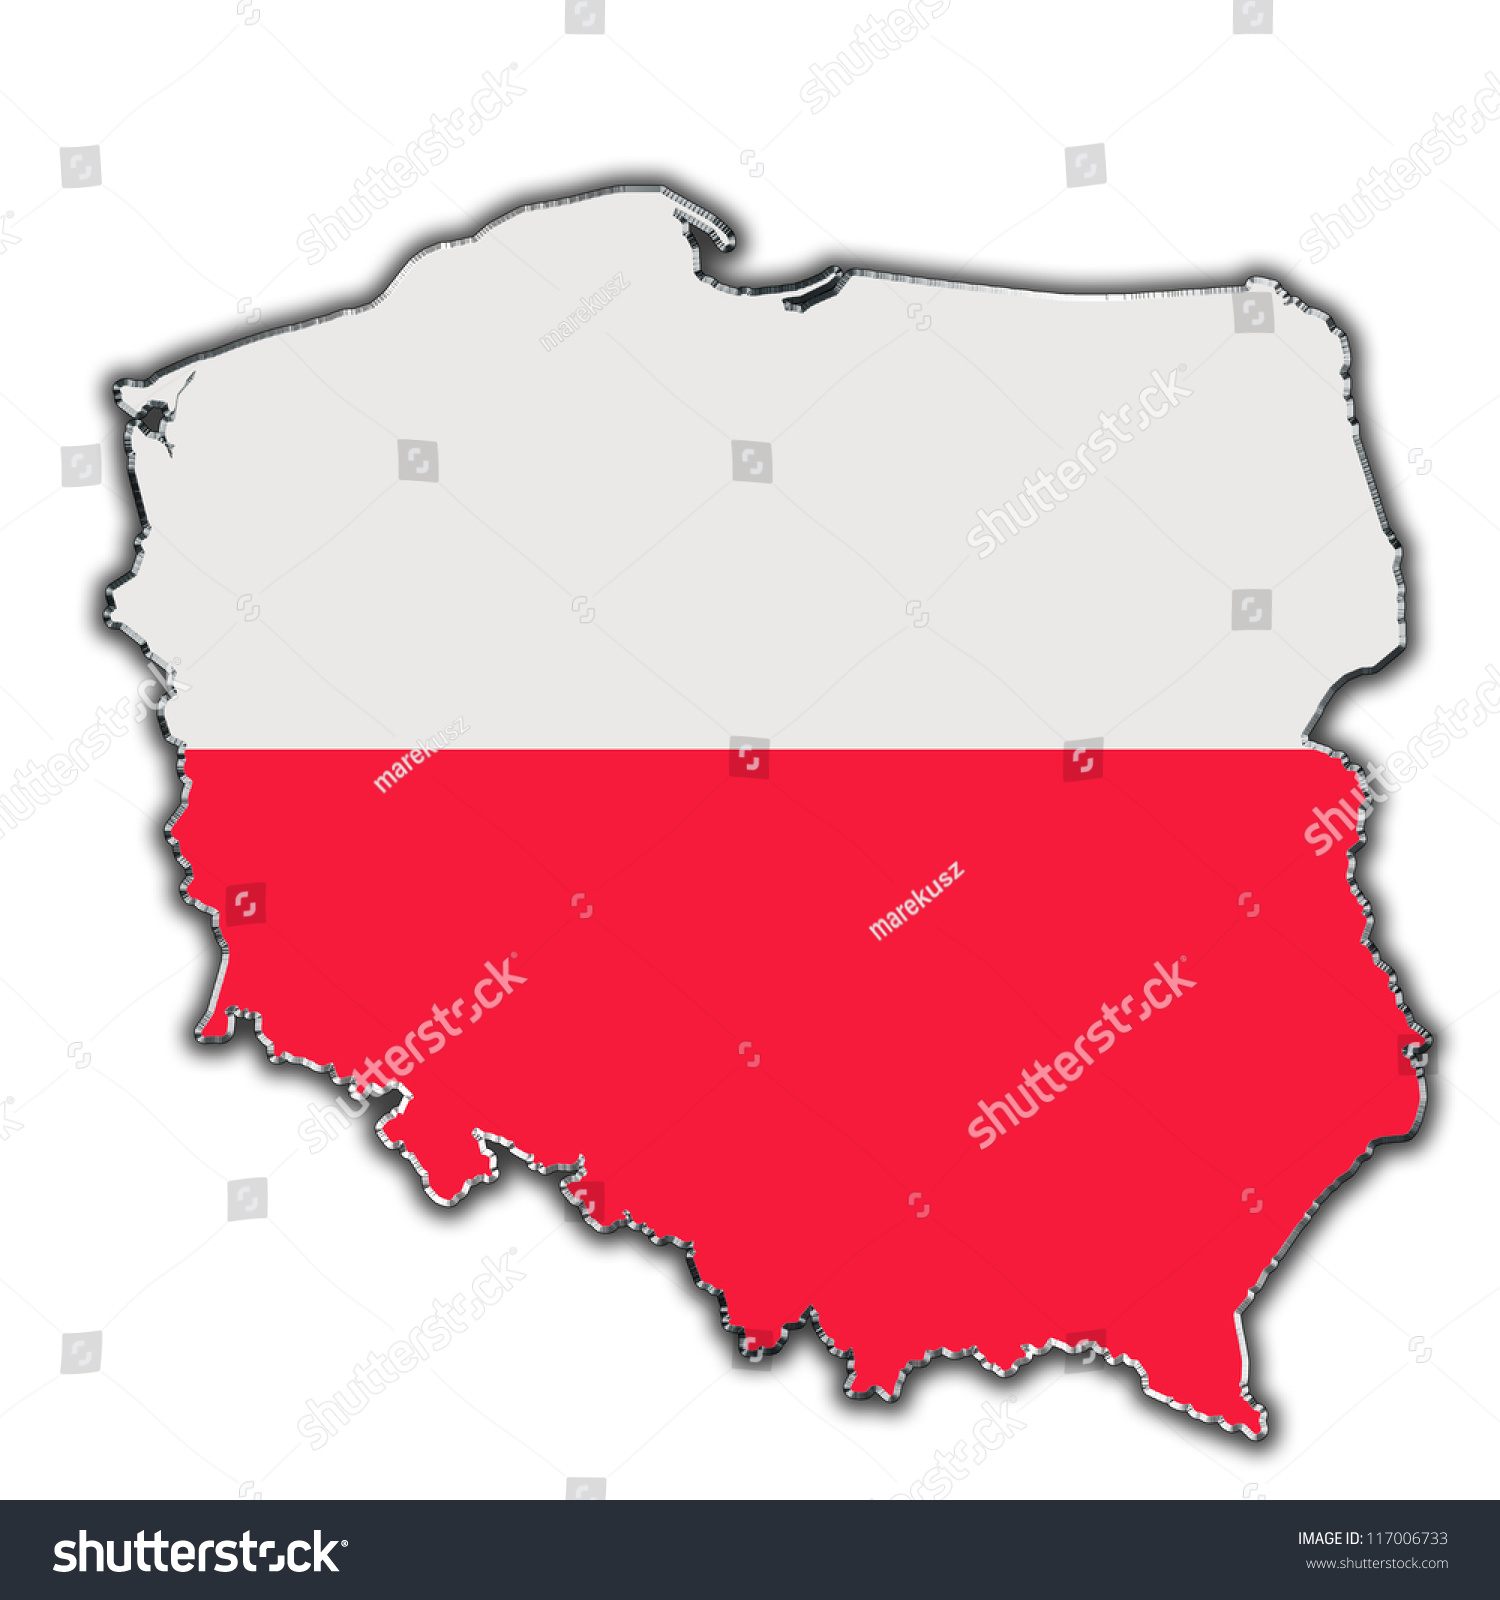 Outline Map Of Poland Covered In Polish Flag Stock Photo 117006733 ...